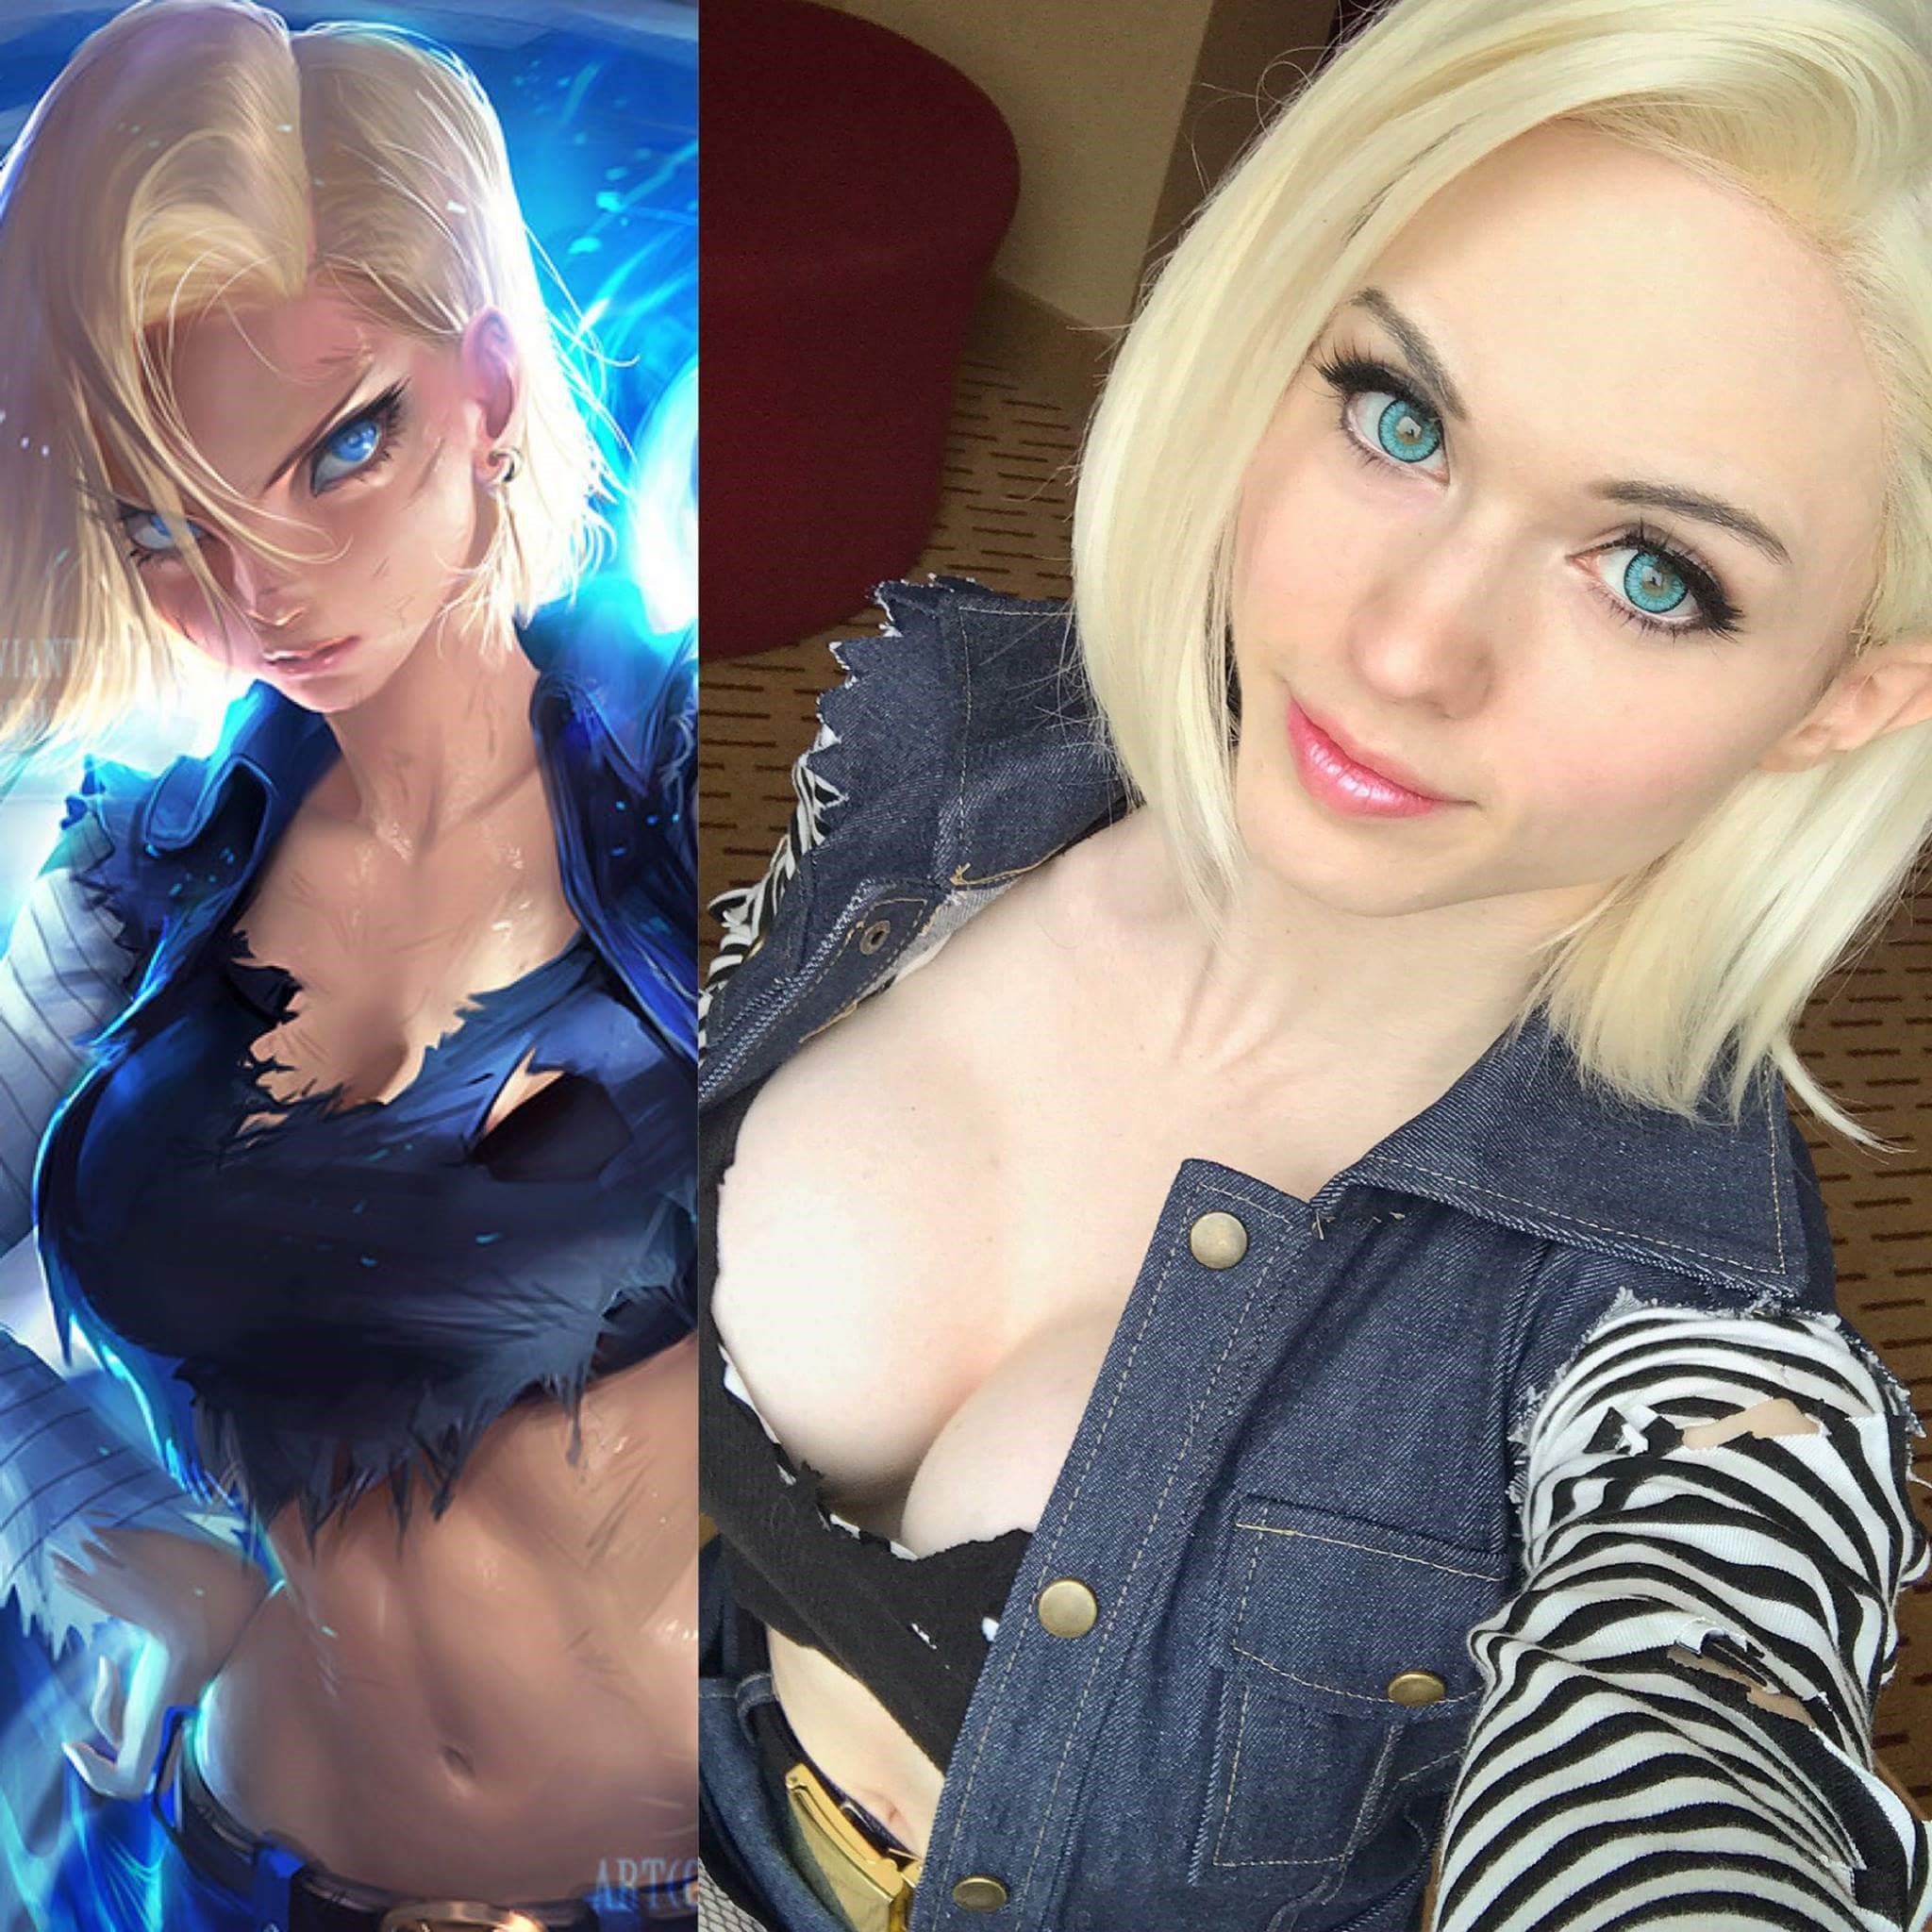 Wouldn't kick her out of my gym. android 18 cosplay porn - Me. 